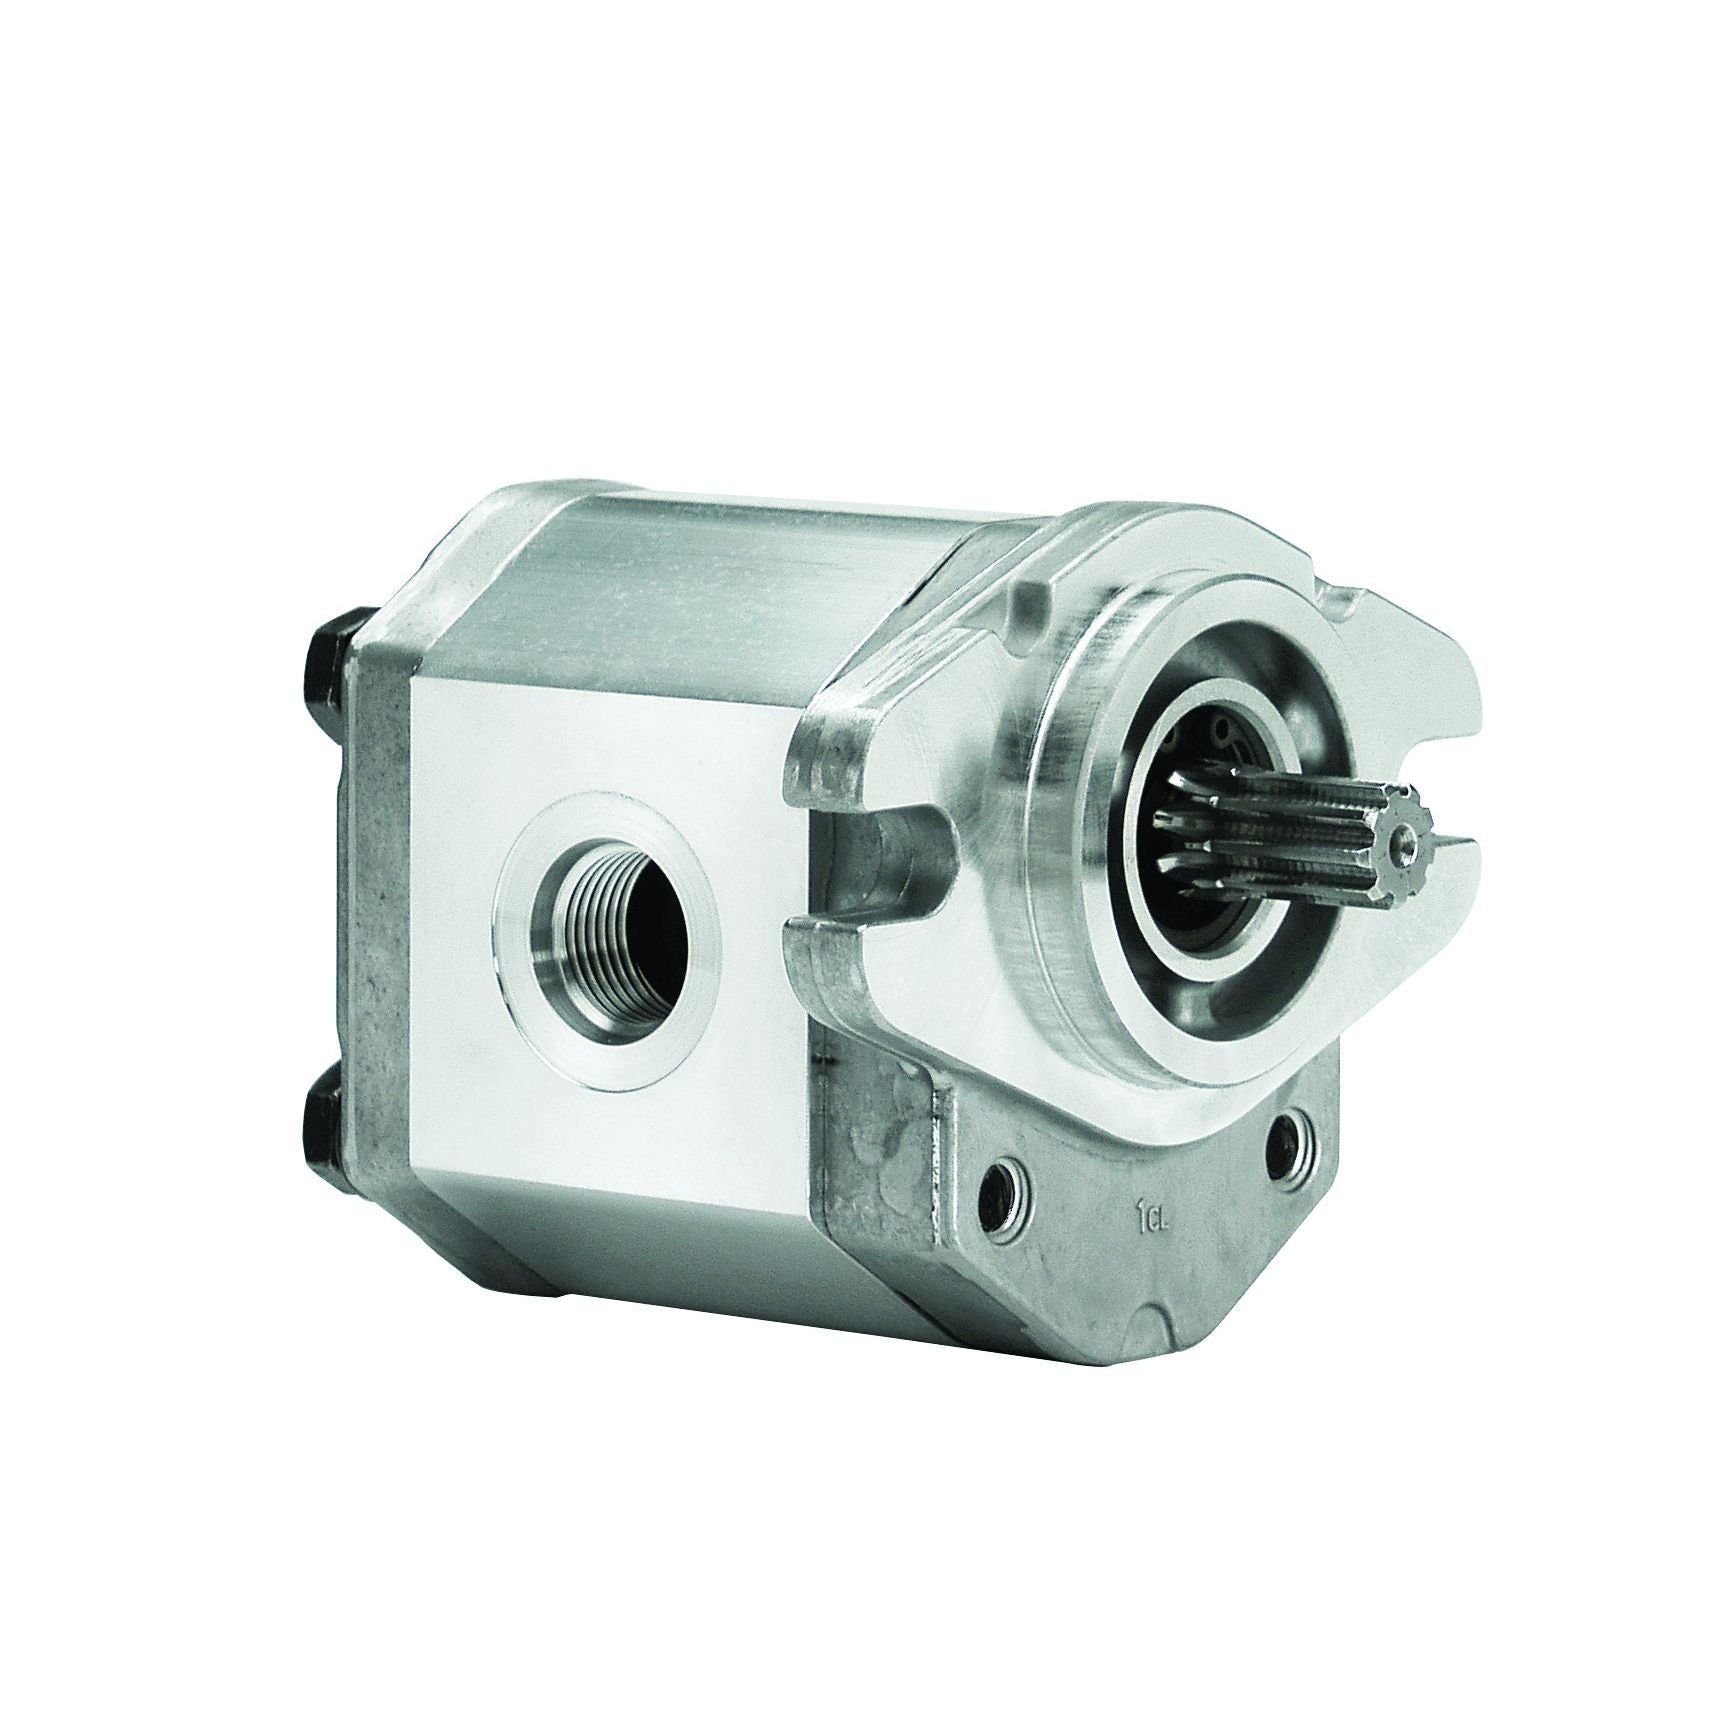 ALP3A-D-135-S1-FA : Marzocchi Gear Pump, CW, 87cc (5.307in3), 41.35 GPM, 2030psi, 2000 RPM, #24 SAE (1.5") In, #12 SAE (3/4") Out, Splined Shaft 13T 16/32DP, SAE B 2-Bolt Mount